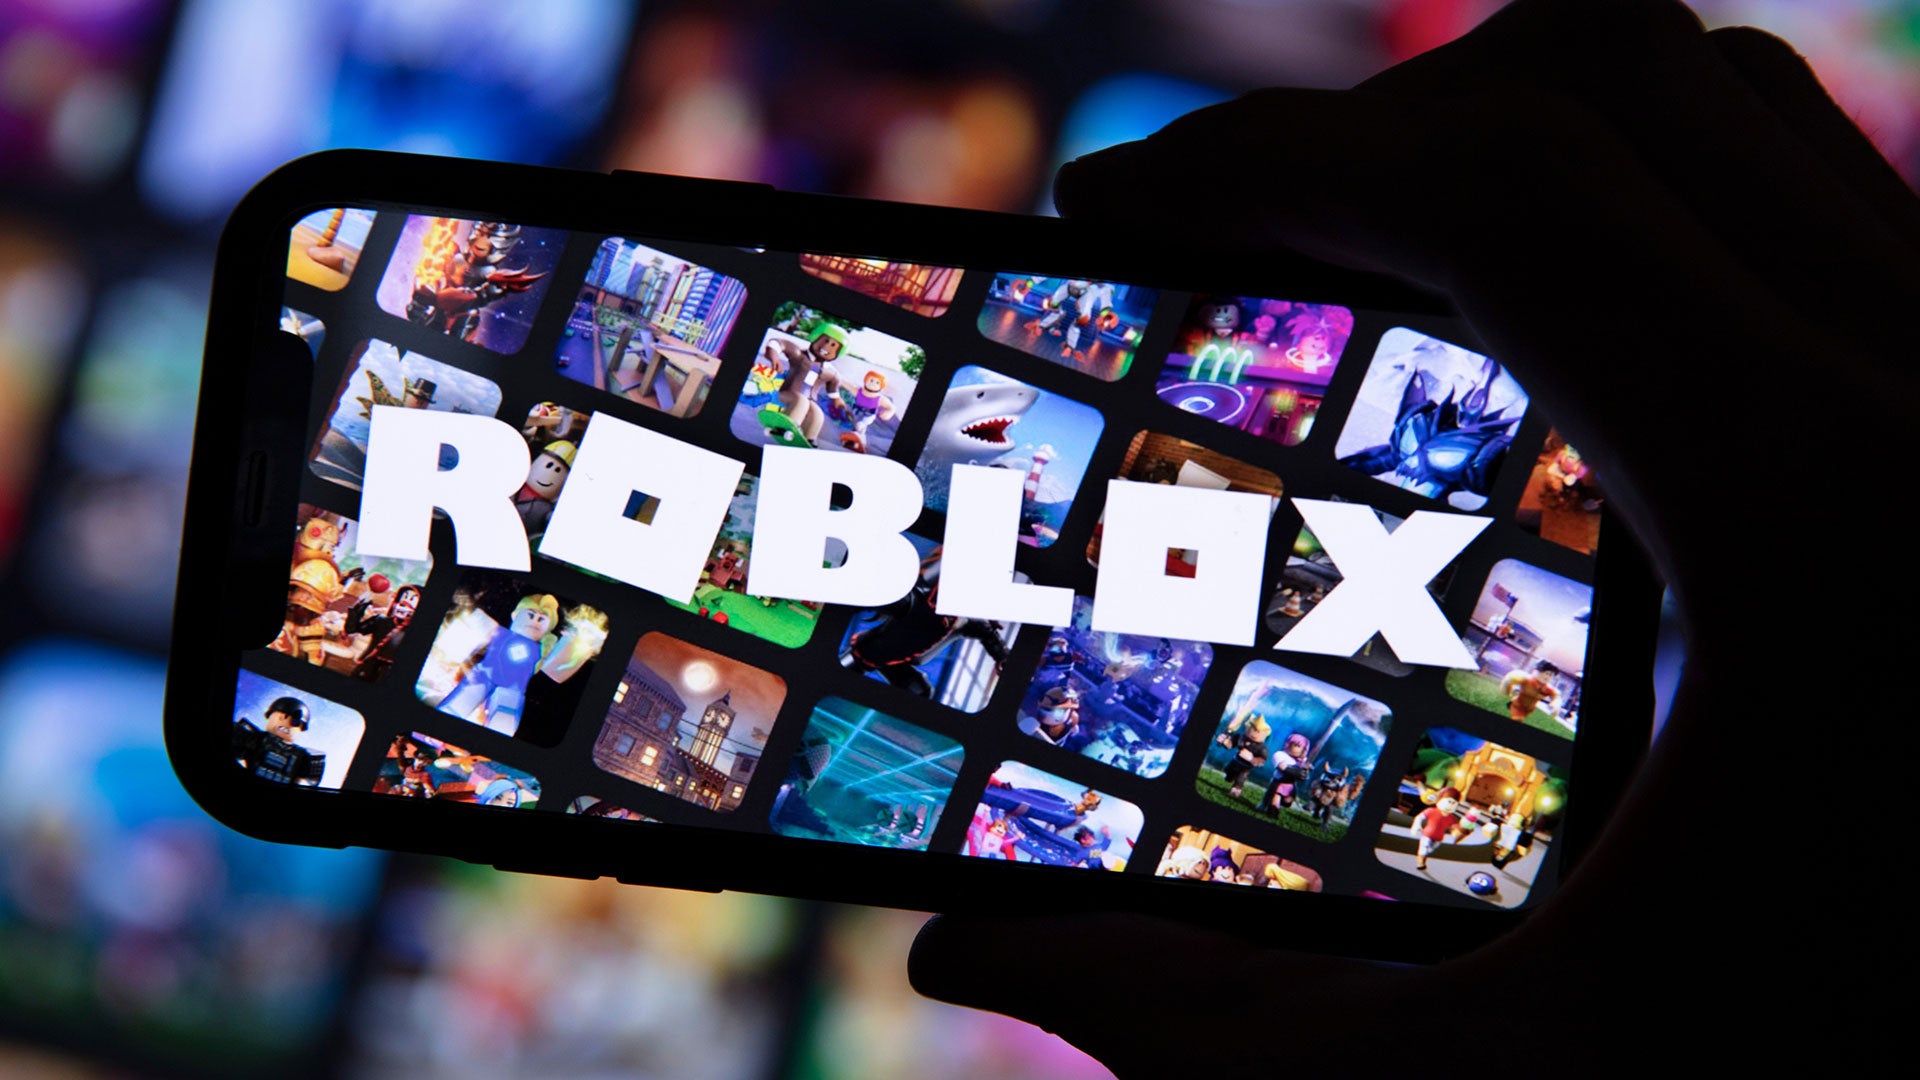 Roblox Games are Exposing Children to Gambling